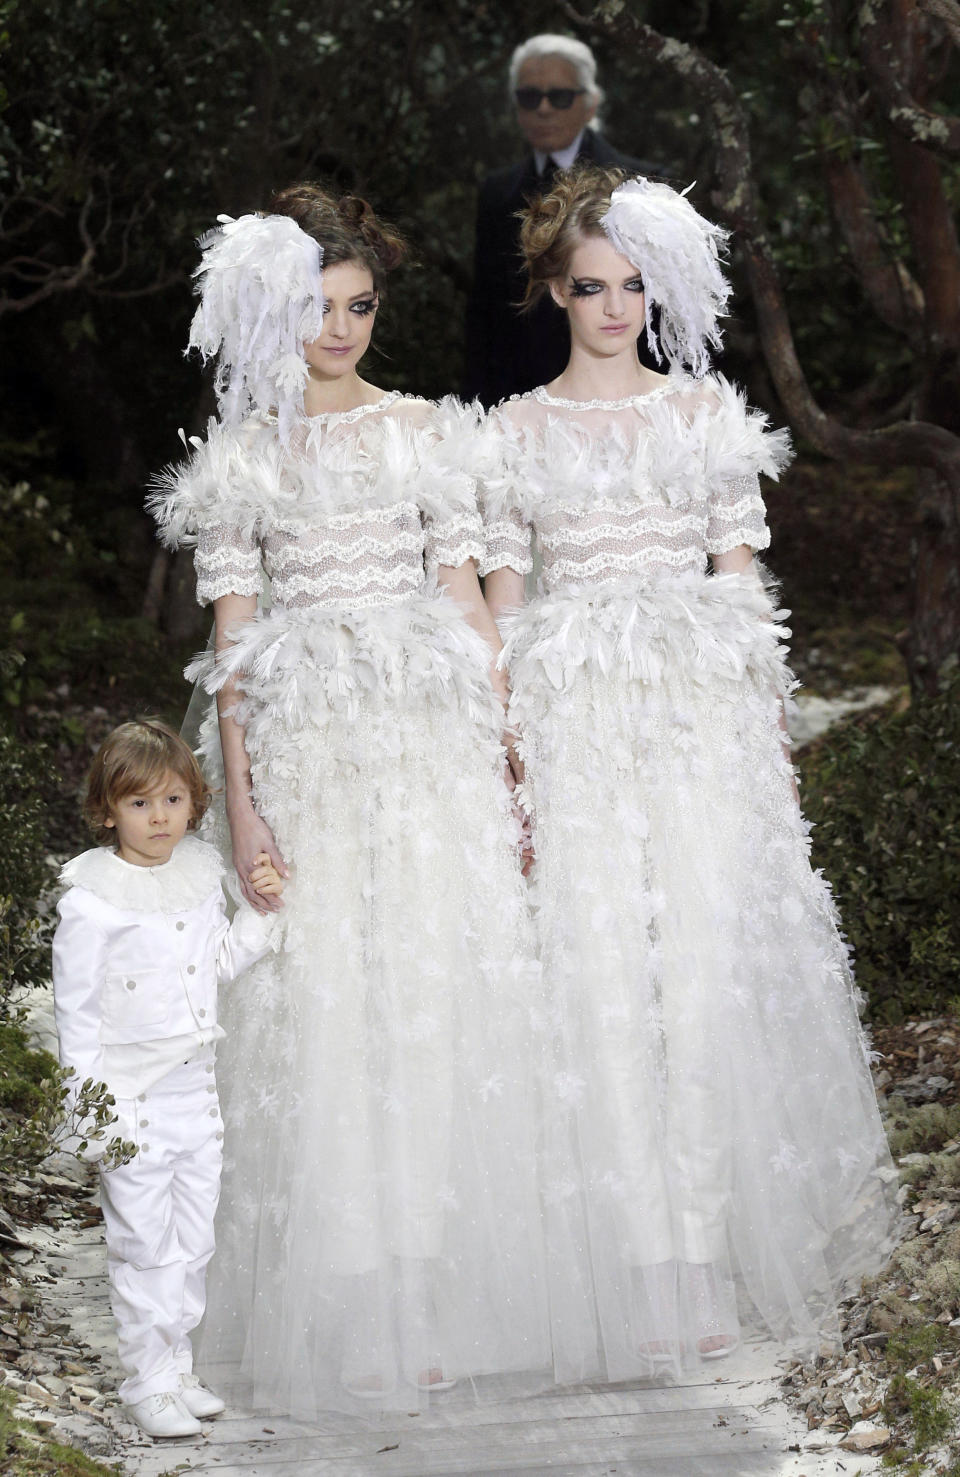 Models wear wedding gowns, by German fashion designer Karl Lagerfeld for Chanel's Spring Summer 2013 Haute Couture fashion collection, presented in Paris, Tuesday, Jan. 22, 2013. Chanel's veteran couturier Karl Lagerfeld has used fashion to support a controversial French gay marriage law, sending two brides together down the catwalk. He can be seen in the background. (AP Photo/Christophe Ena)